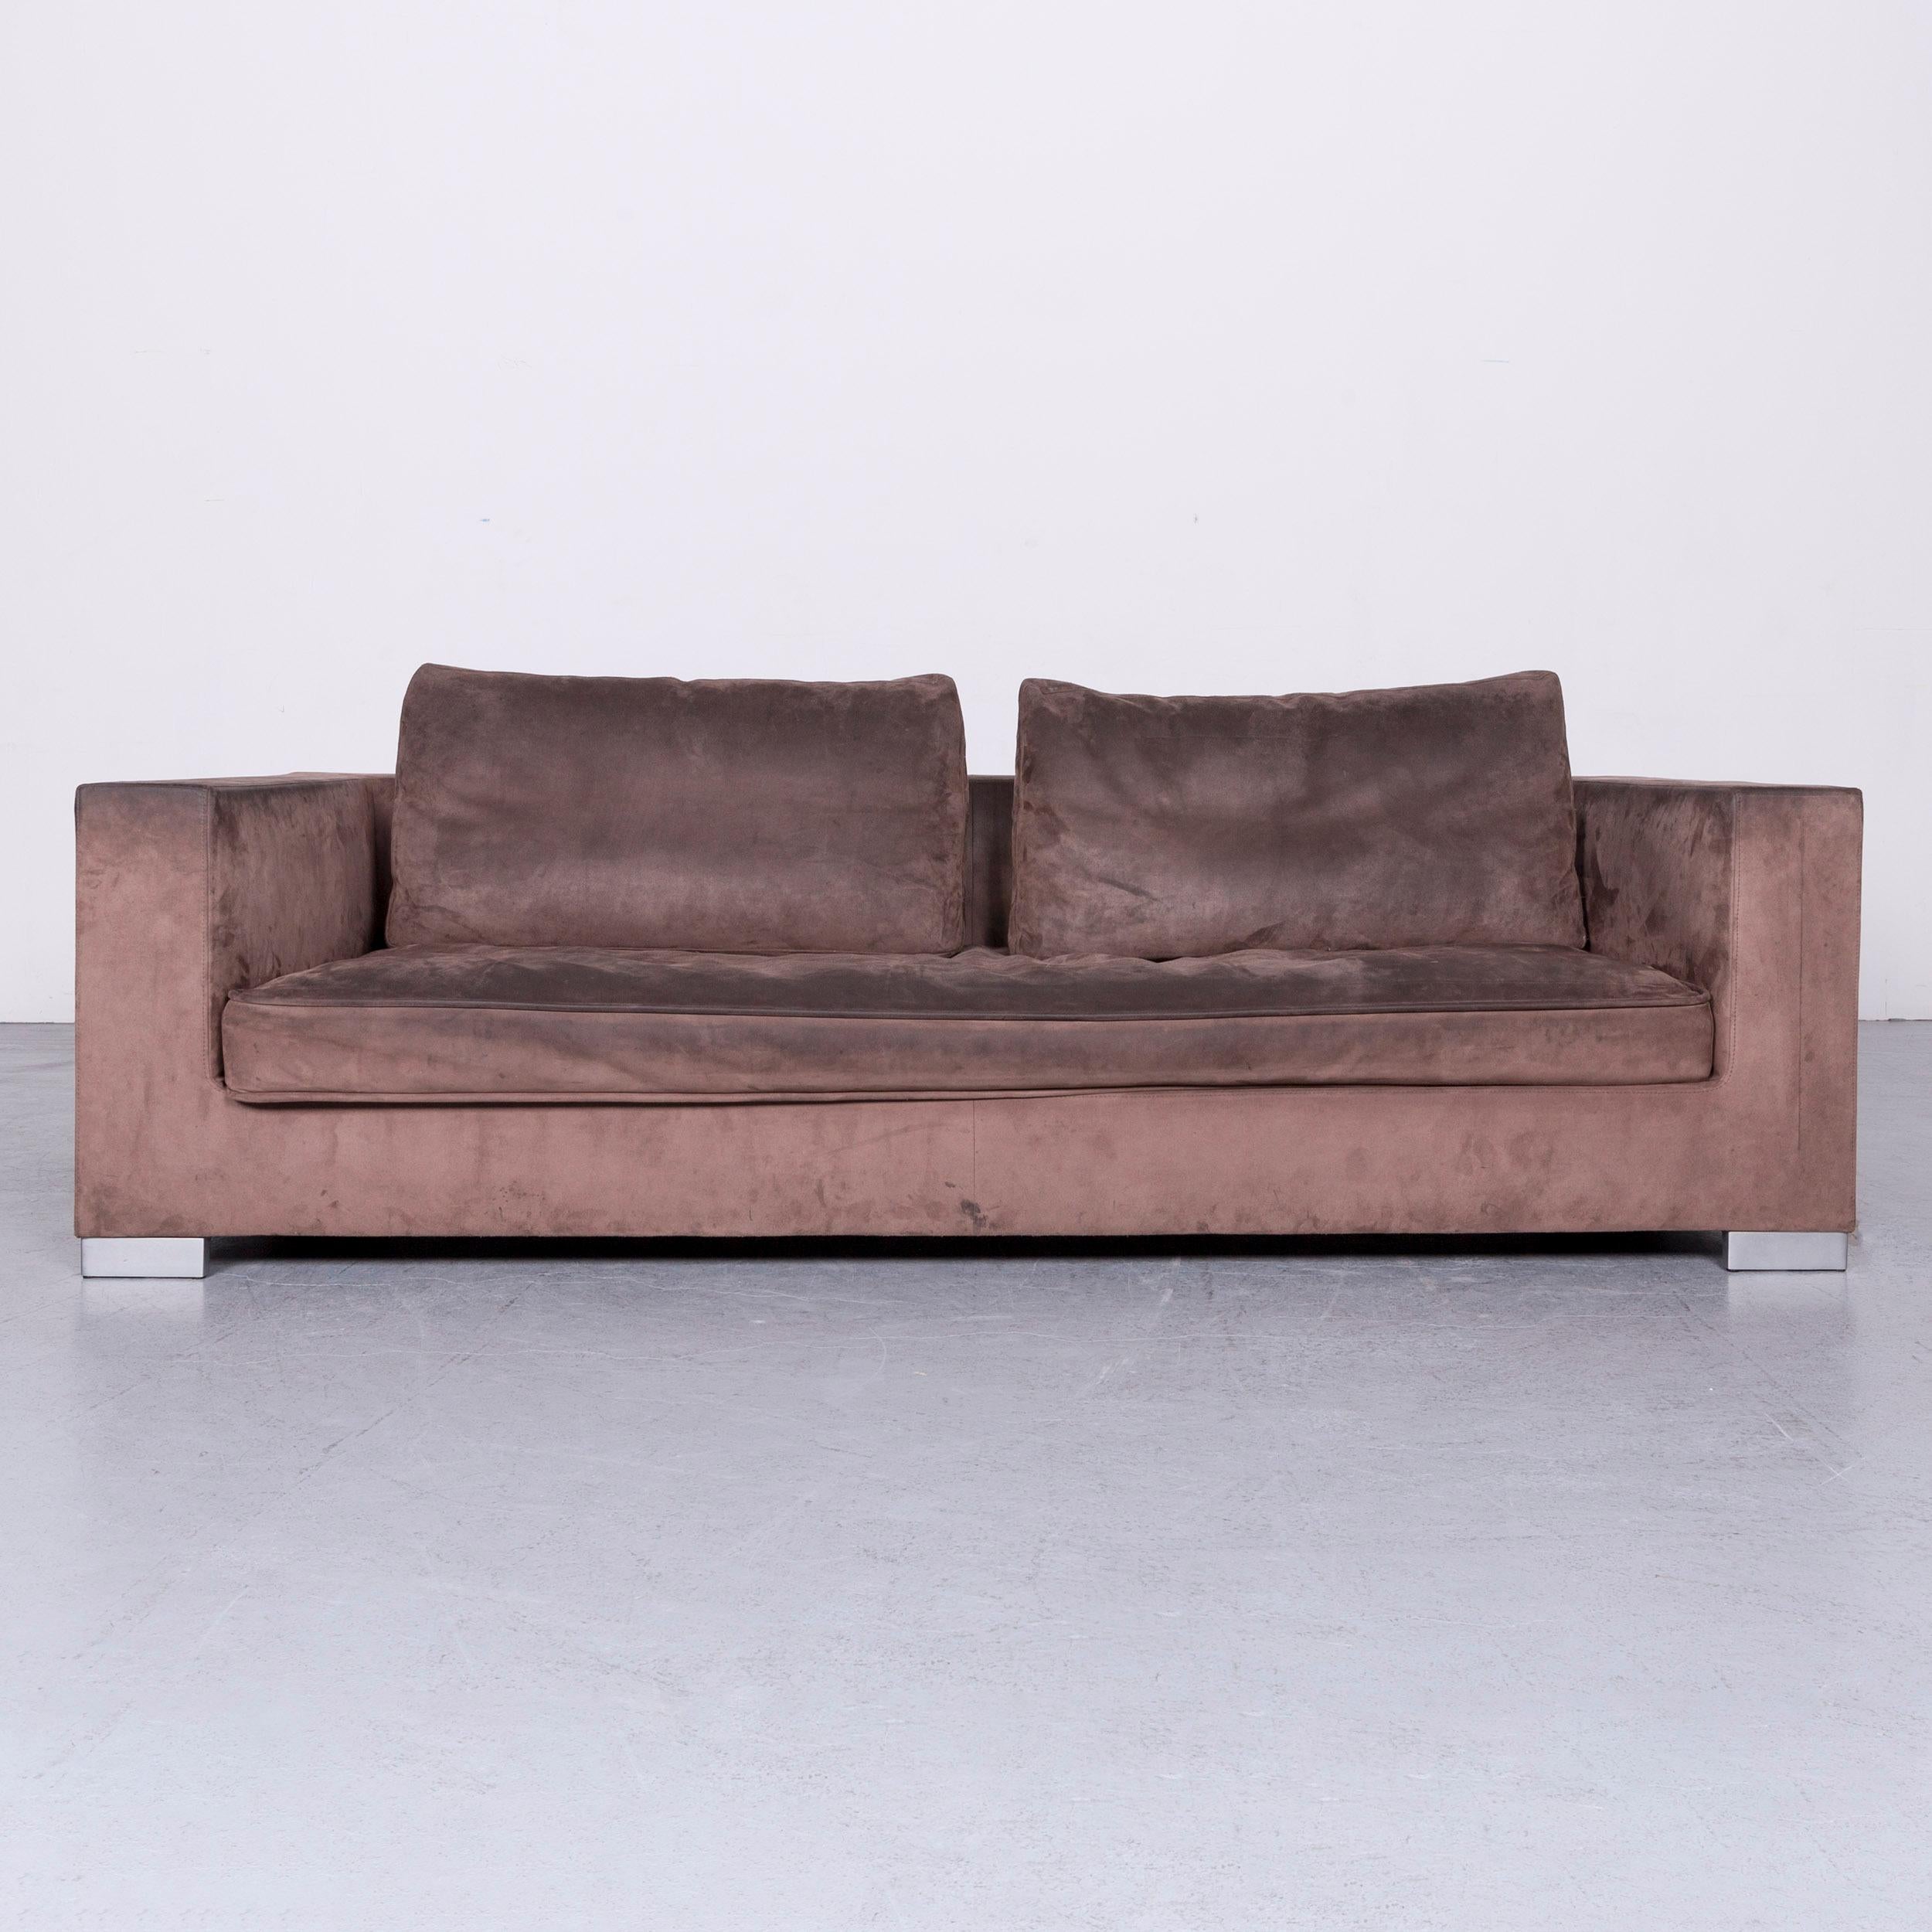 We bring to you a Ligne Roset Rive Gauche designer fabric sofa footstool set brown two-seat couch.